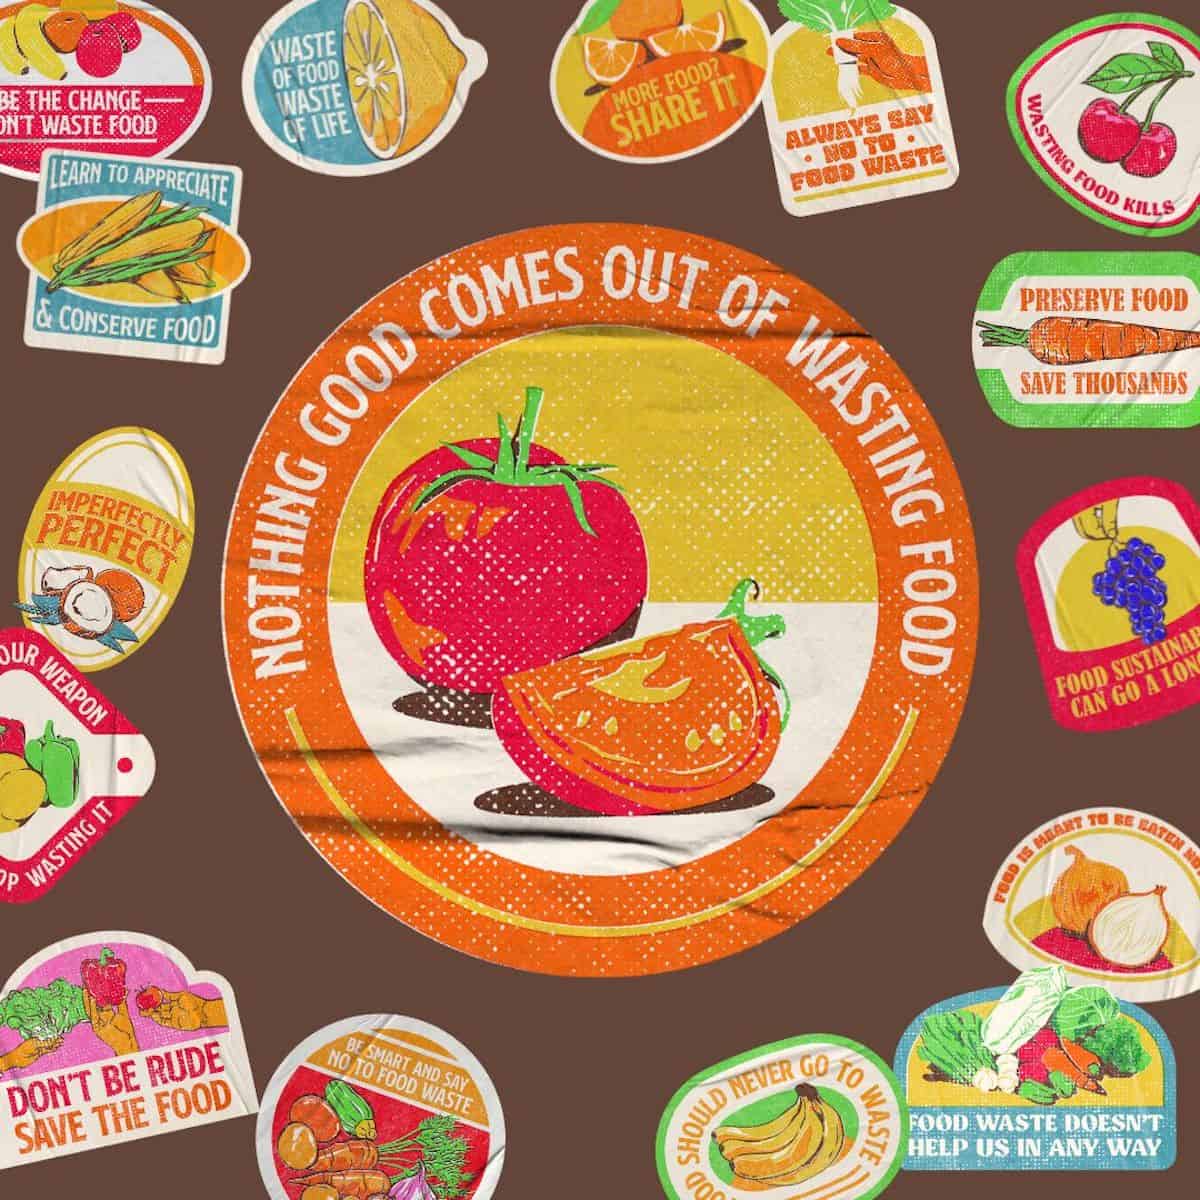 square image with cartoon stickers taht read "nothing good comes out of wasting food, food waste doesn't help us in anyway, learn to appreciate and conserve food".